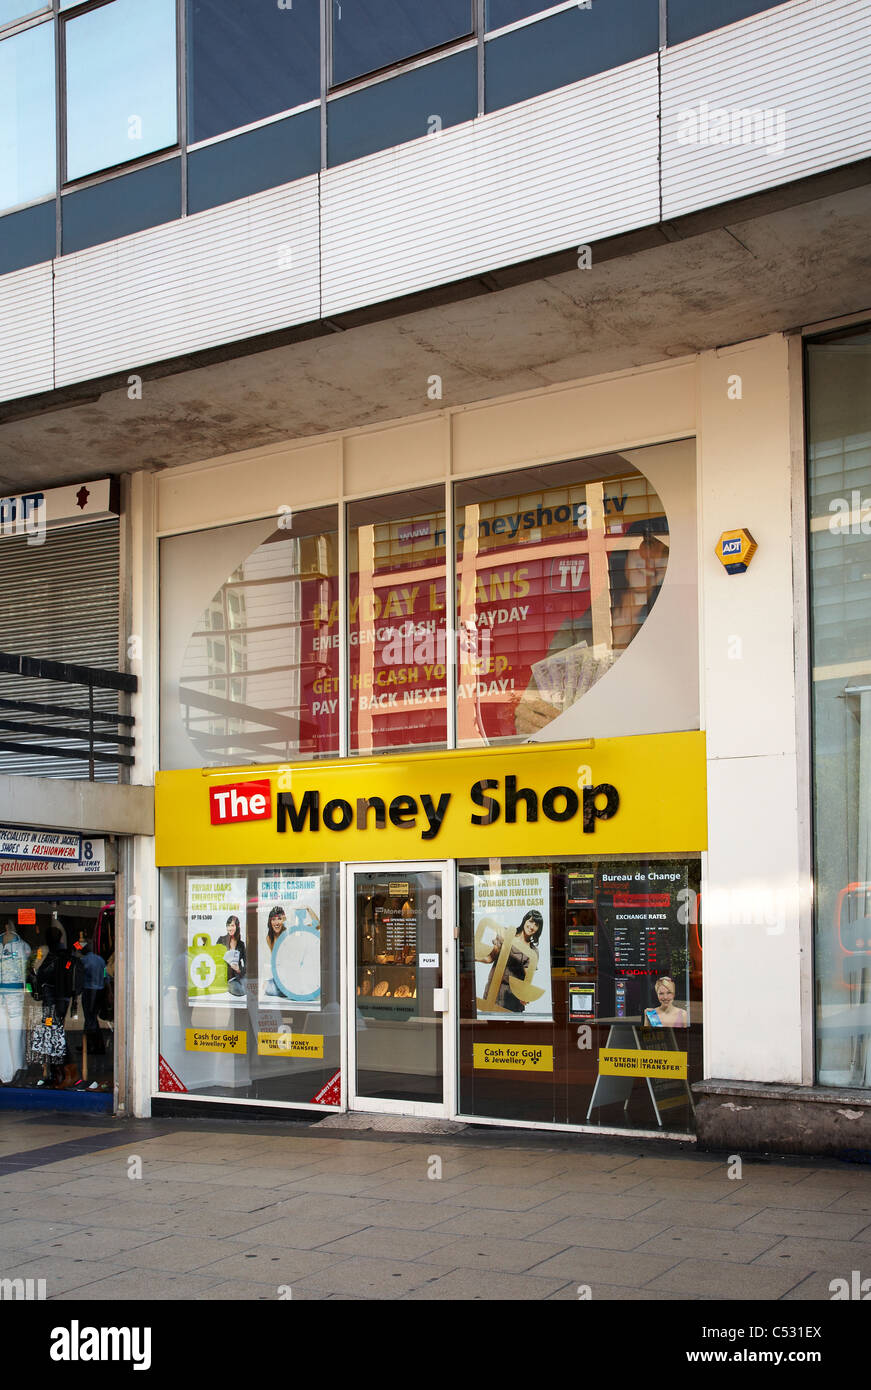 The Money Shop in Manchester UK Stock Photo - Alamy